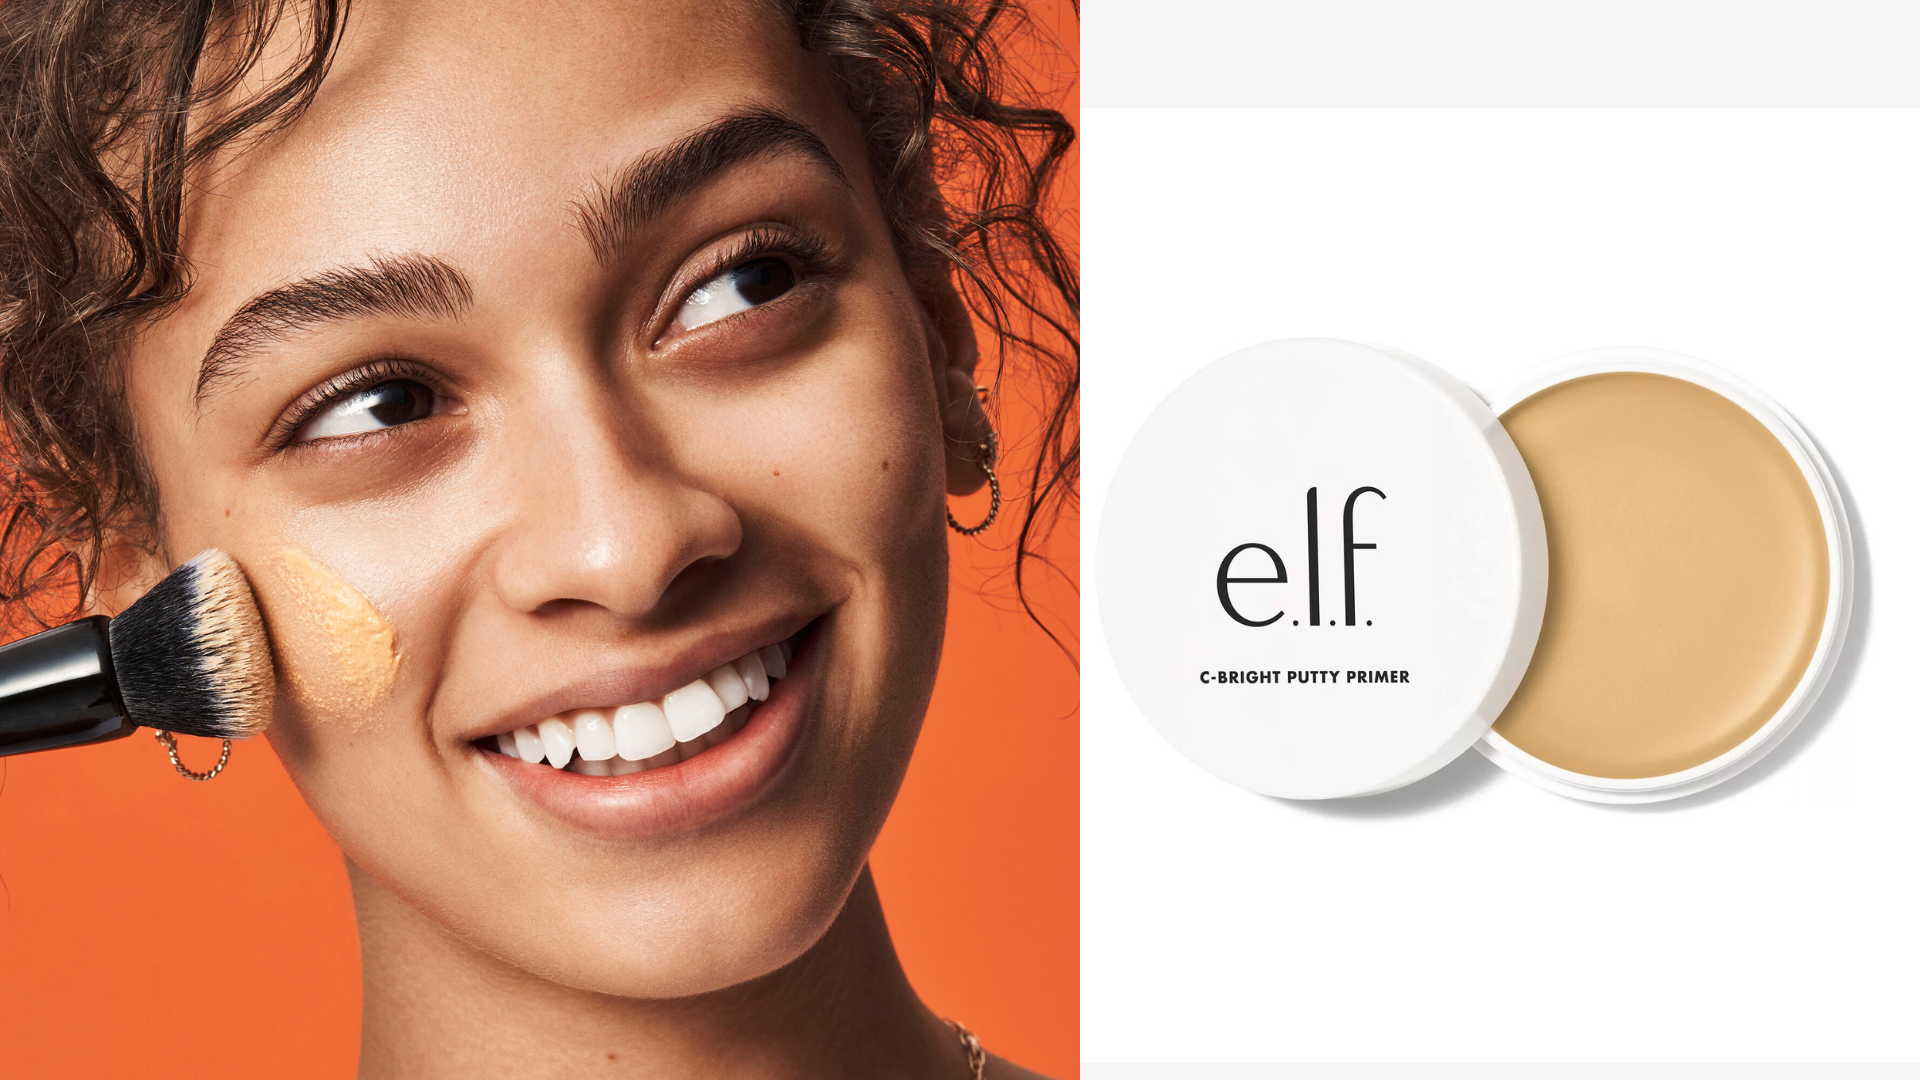 woman using e.l.f's C-Bright Putty Primer Concealer produced in a Fair Trade Certified Factory on left, product image on right